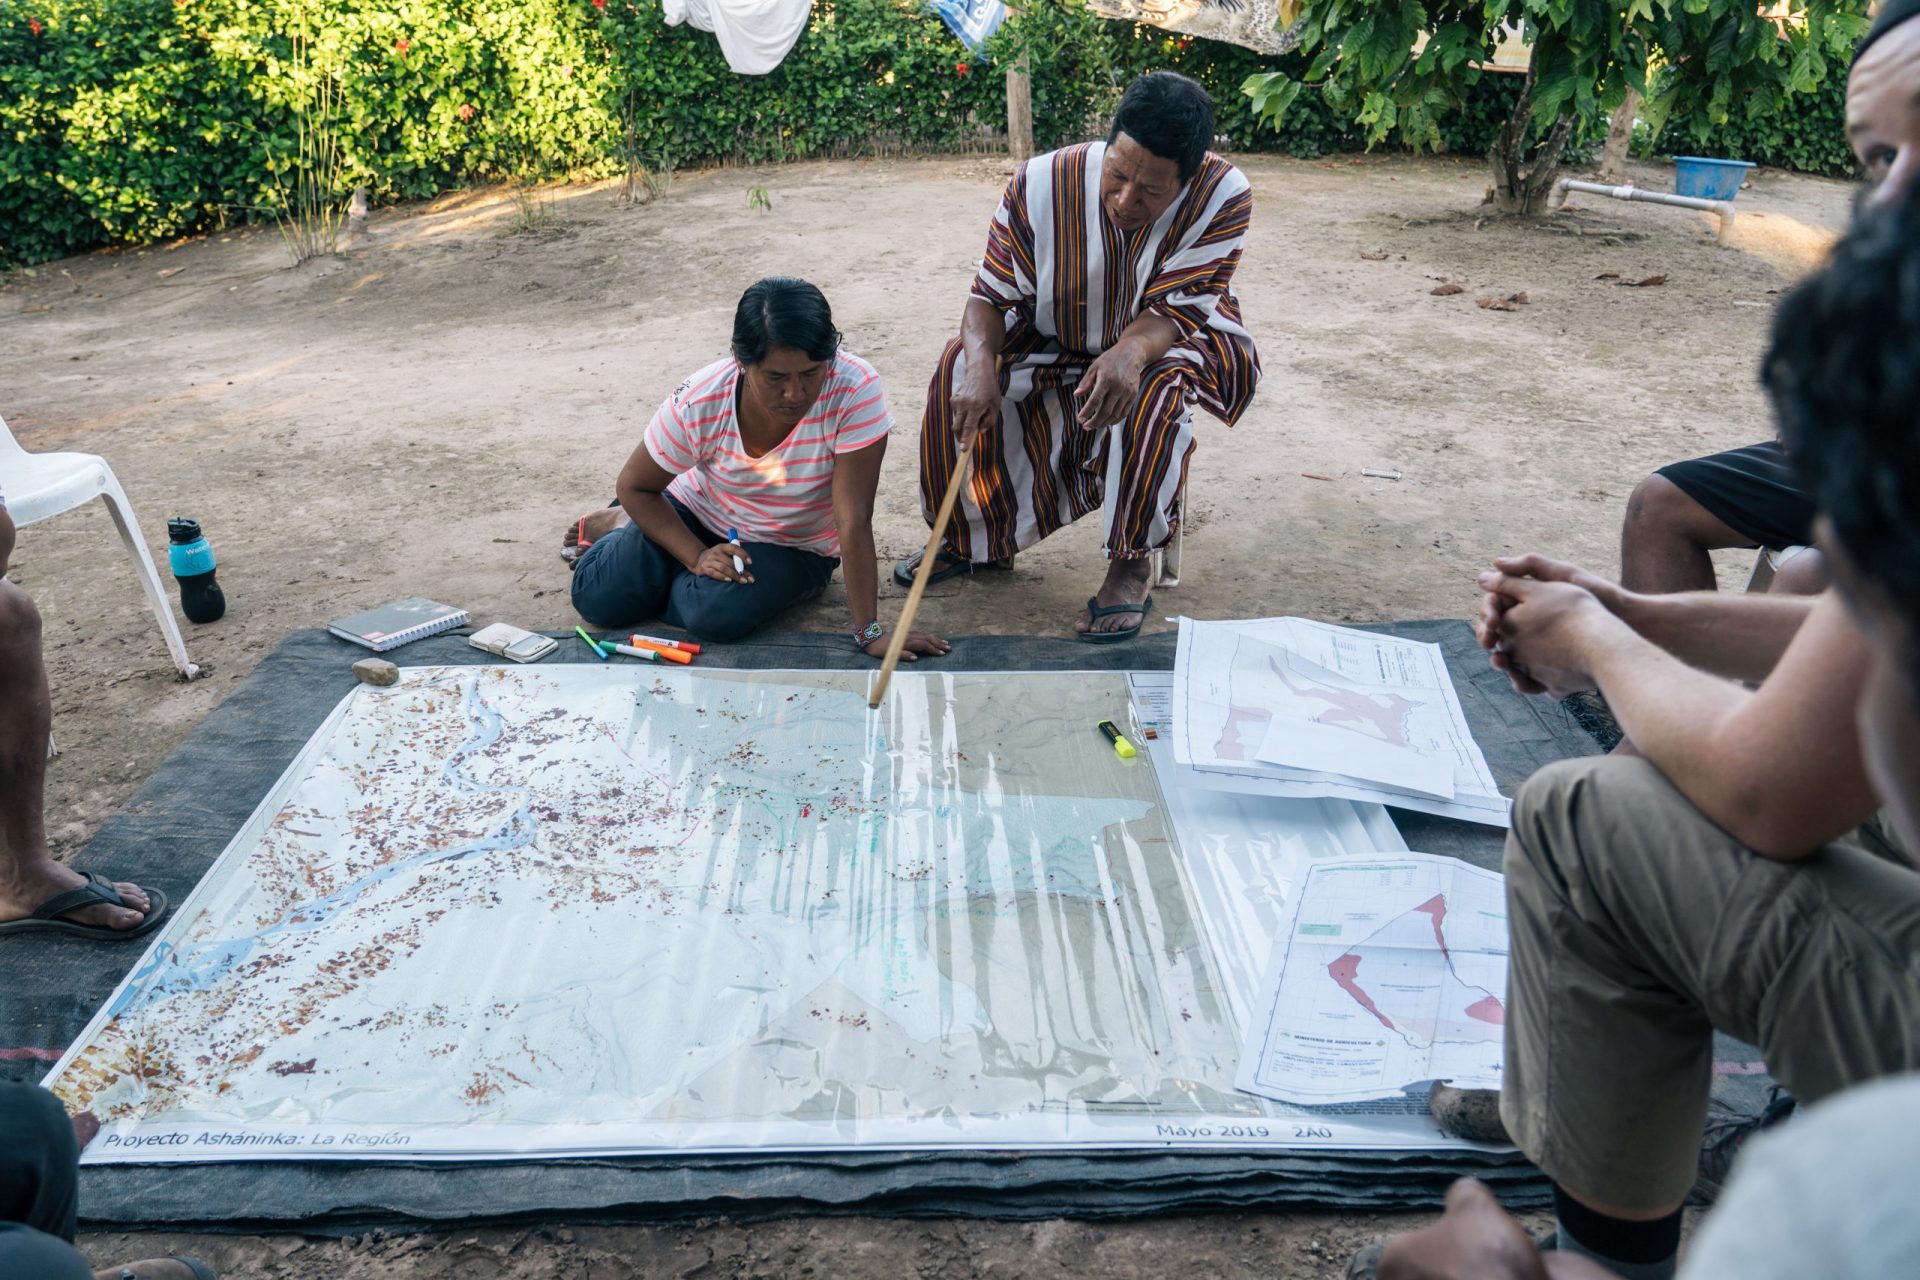 Cool Earth team members look at a large map of the area in a remote village in Peru.